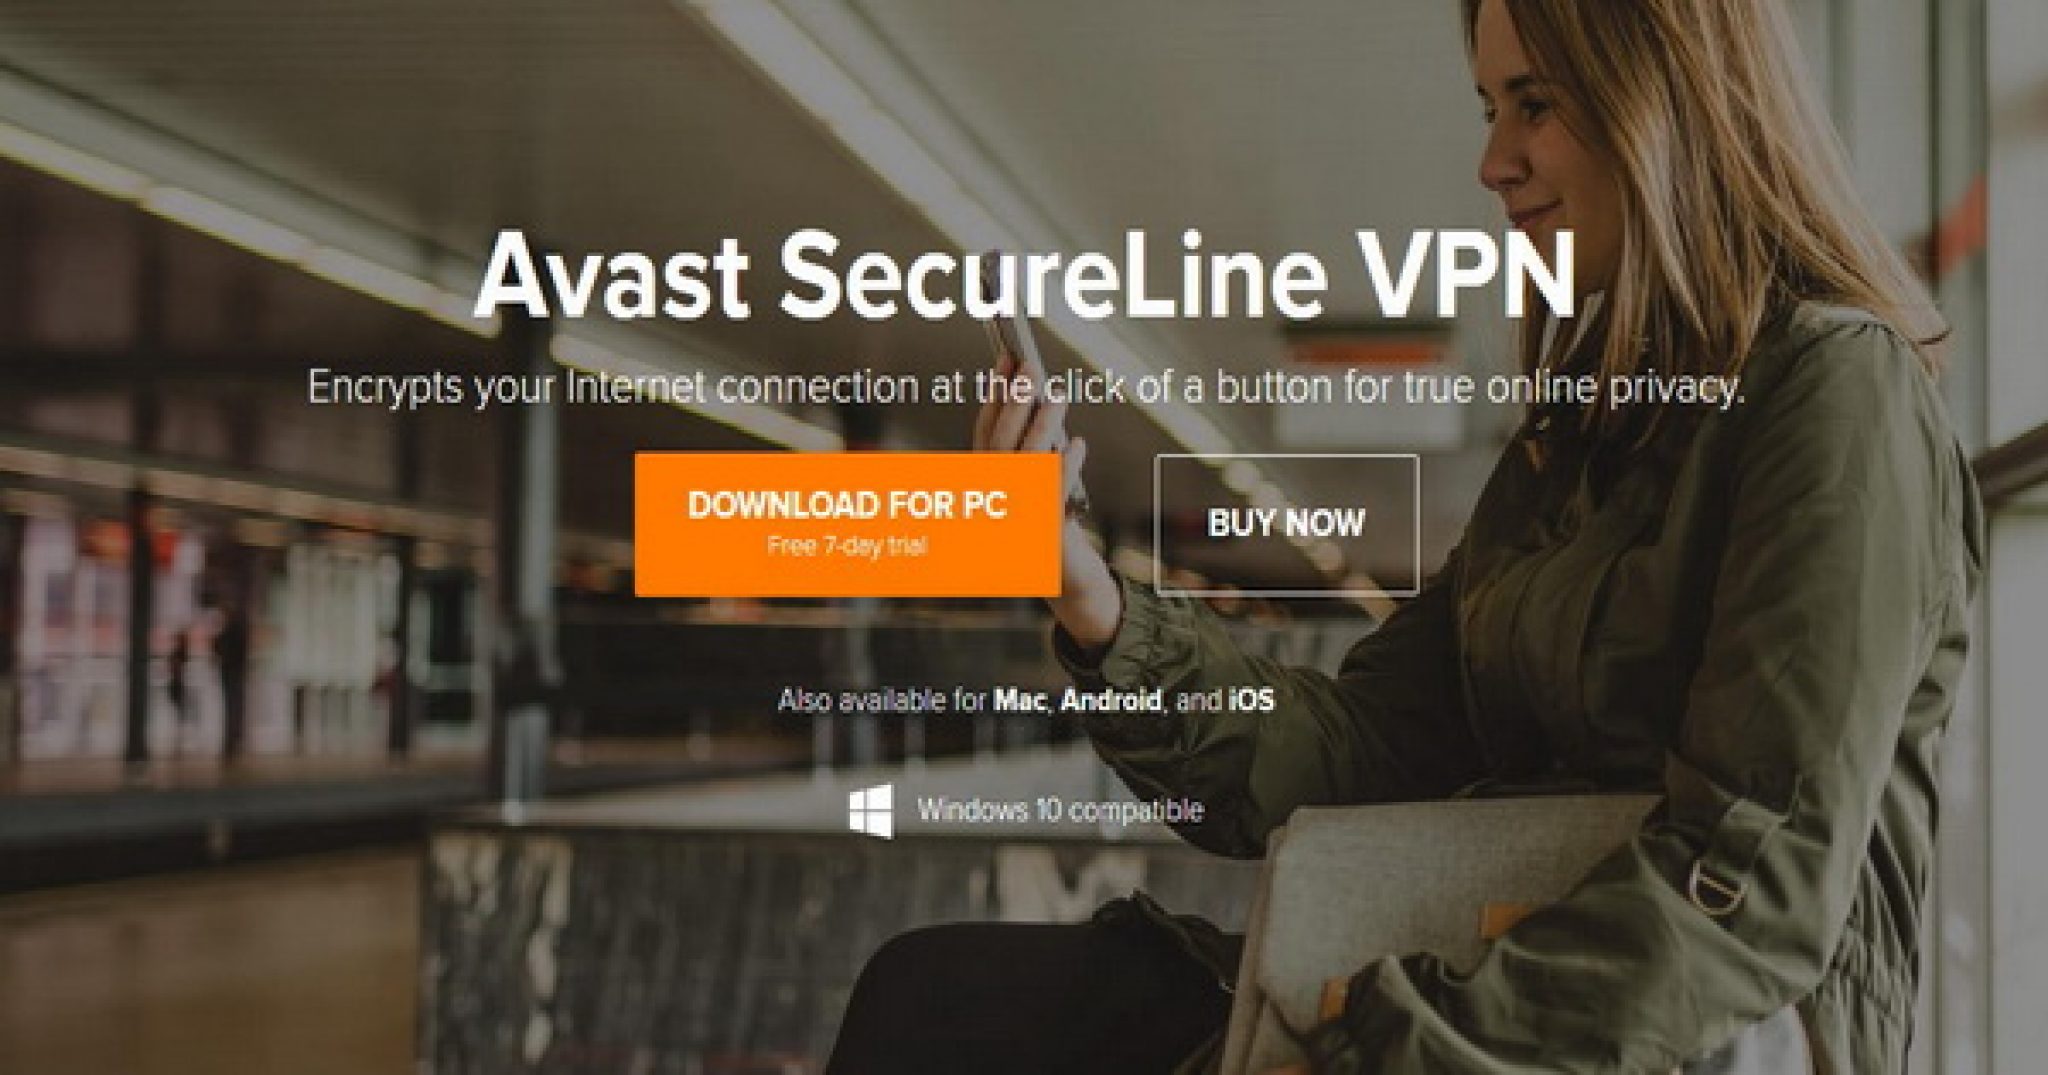 does avast vpn work with netflix if using roku